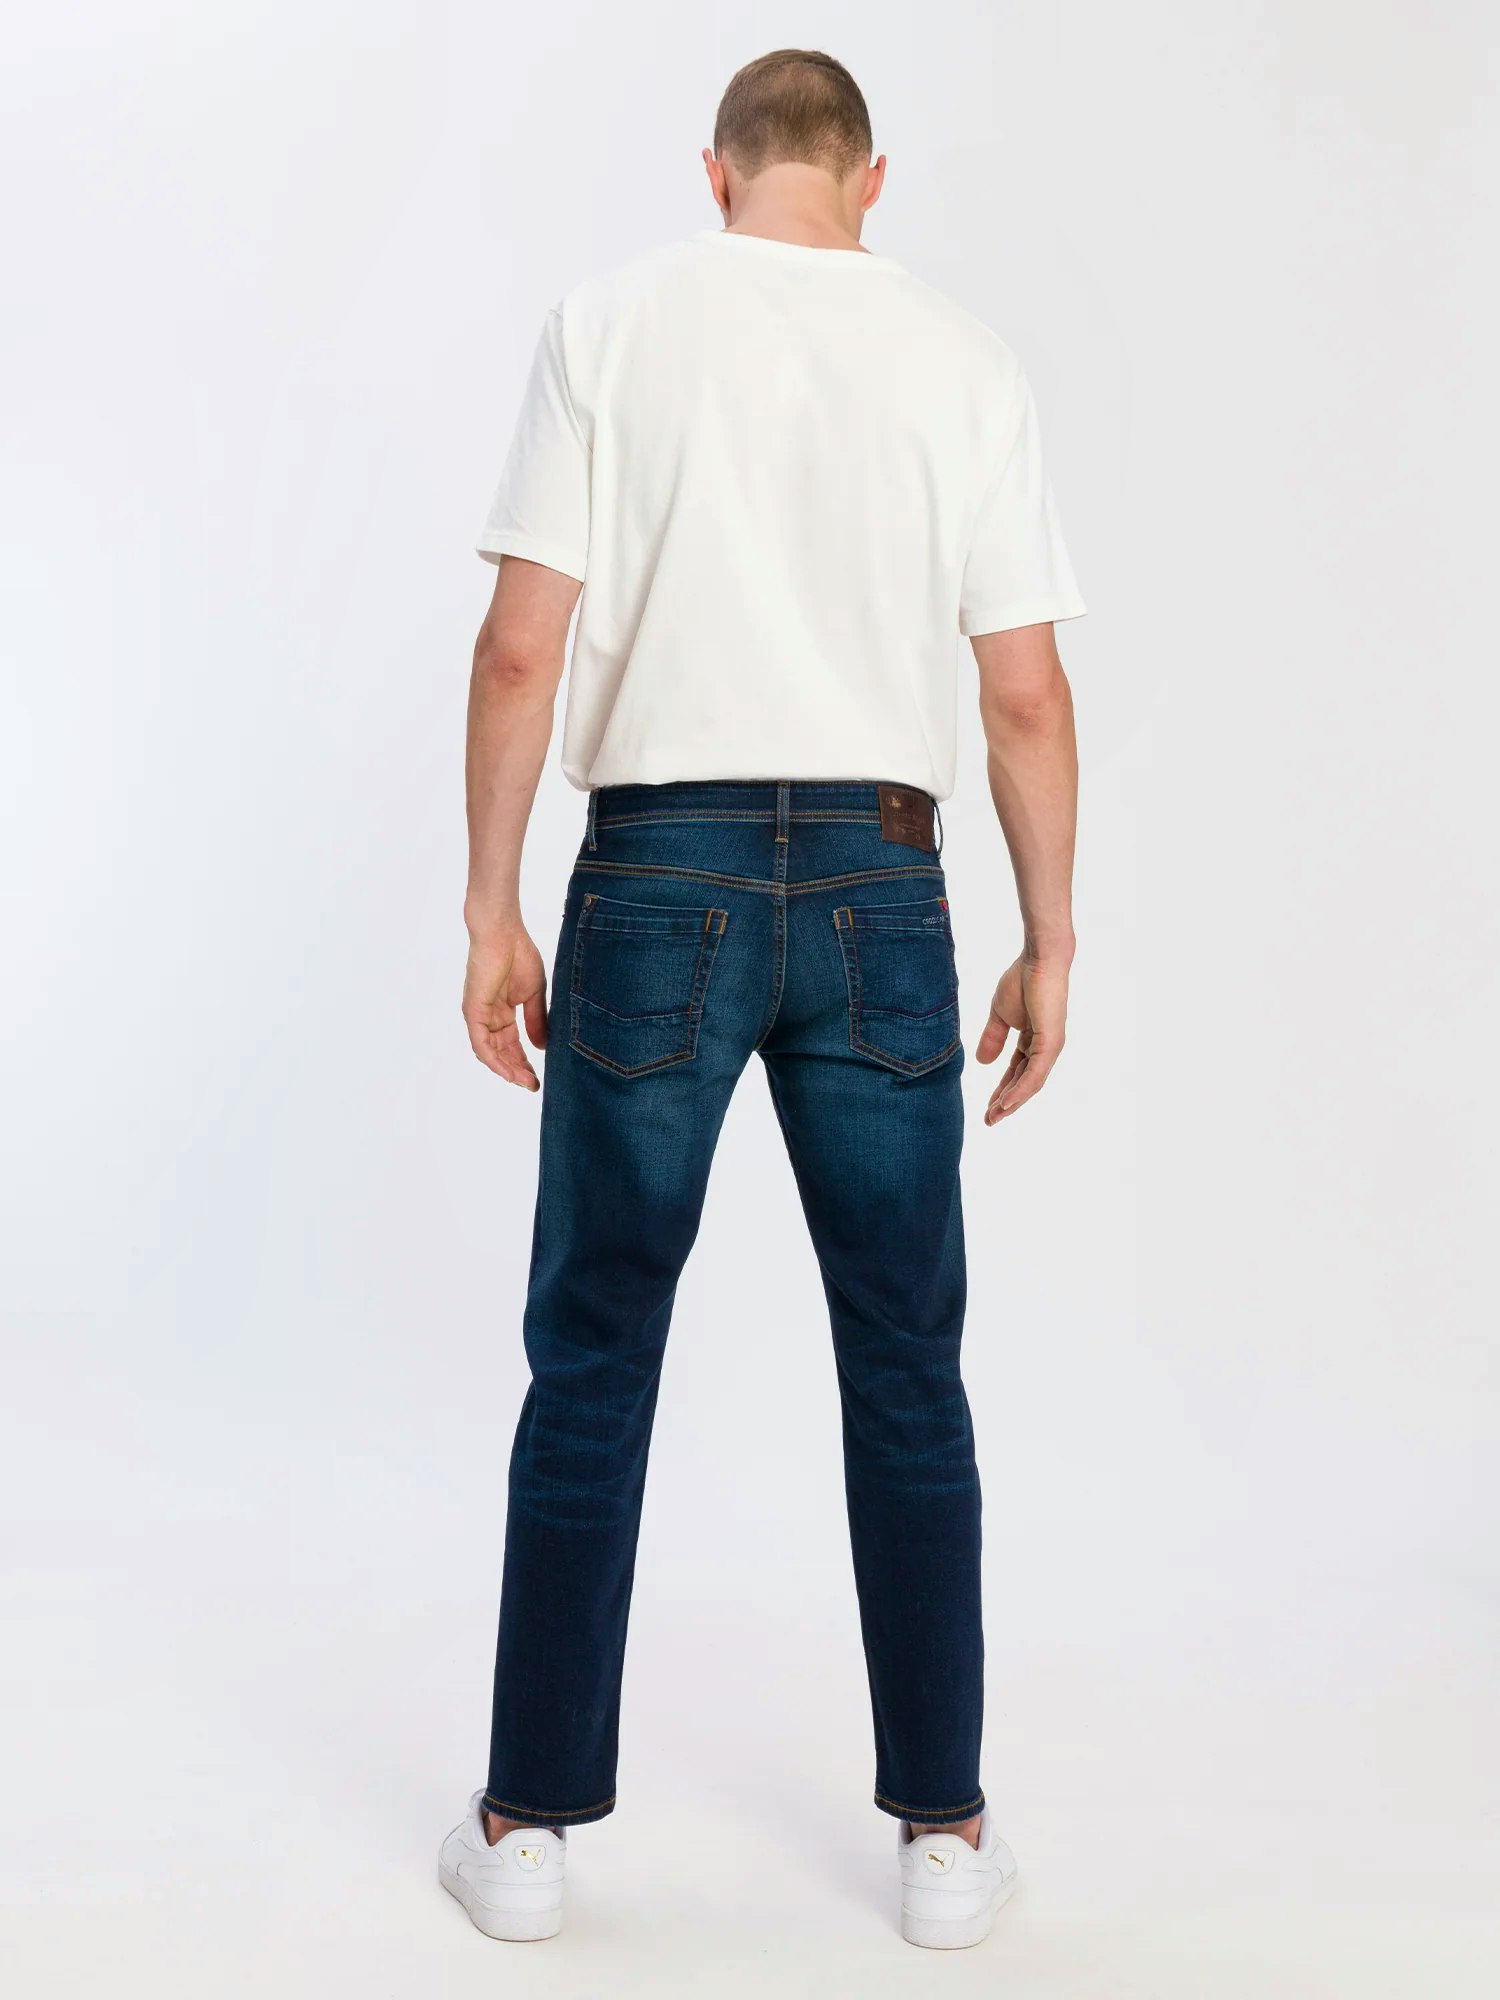 Cross Jeans Antonio Relaxed Fit deep blue